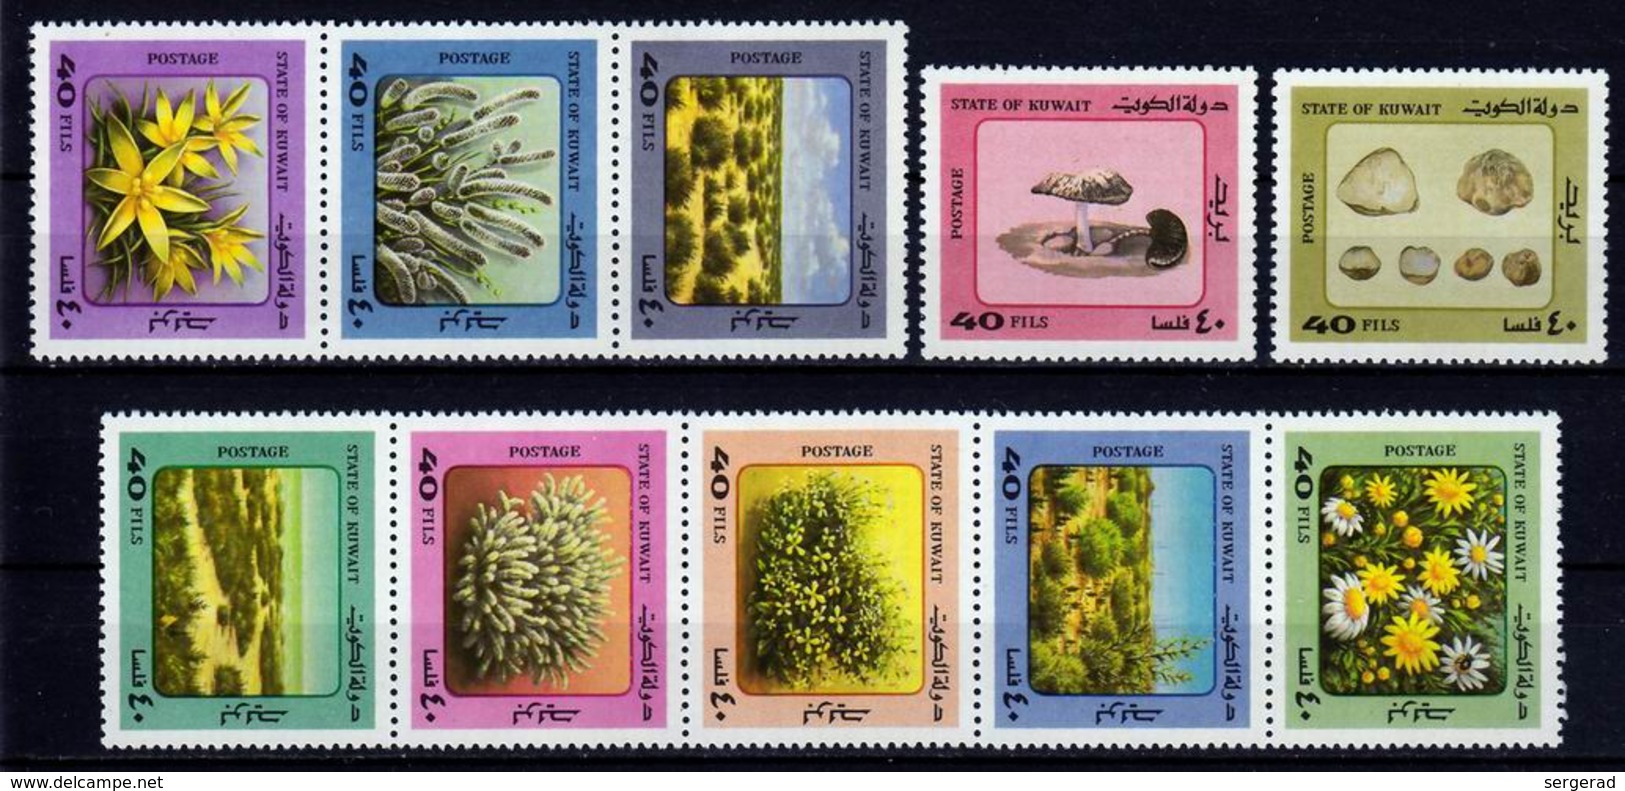 Kuwait-1983, Mushrooms And Plants (part Of A Big Set Of 50 Stamps), MNH** - Mushrooms